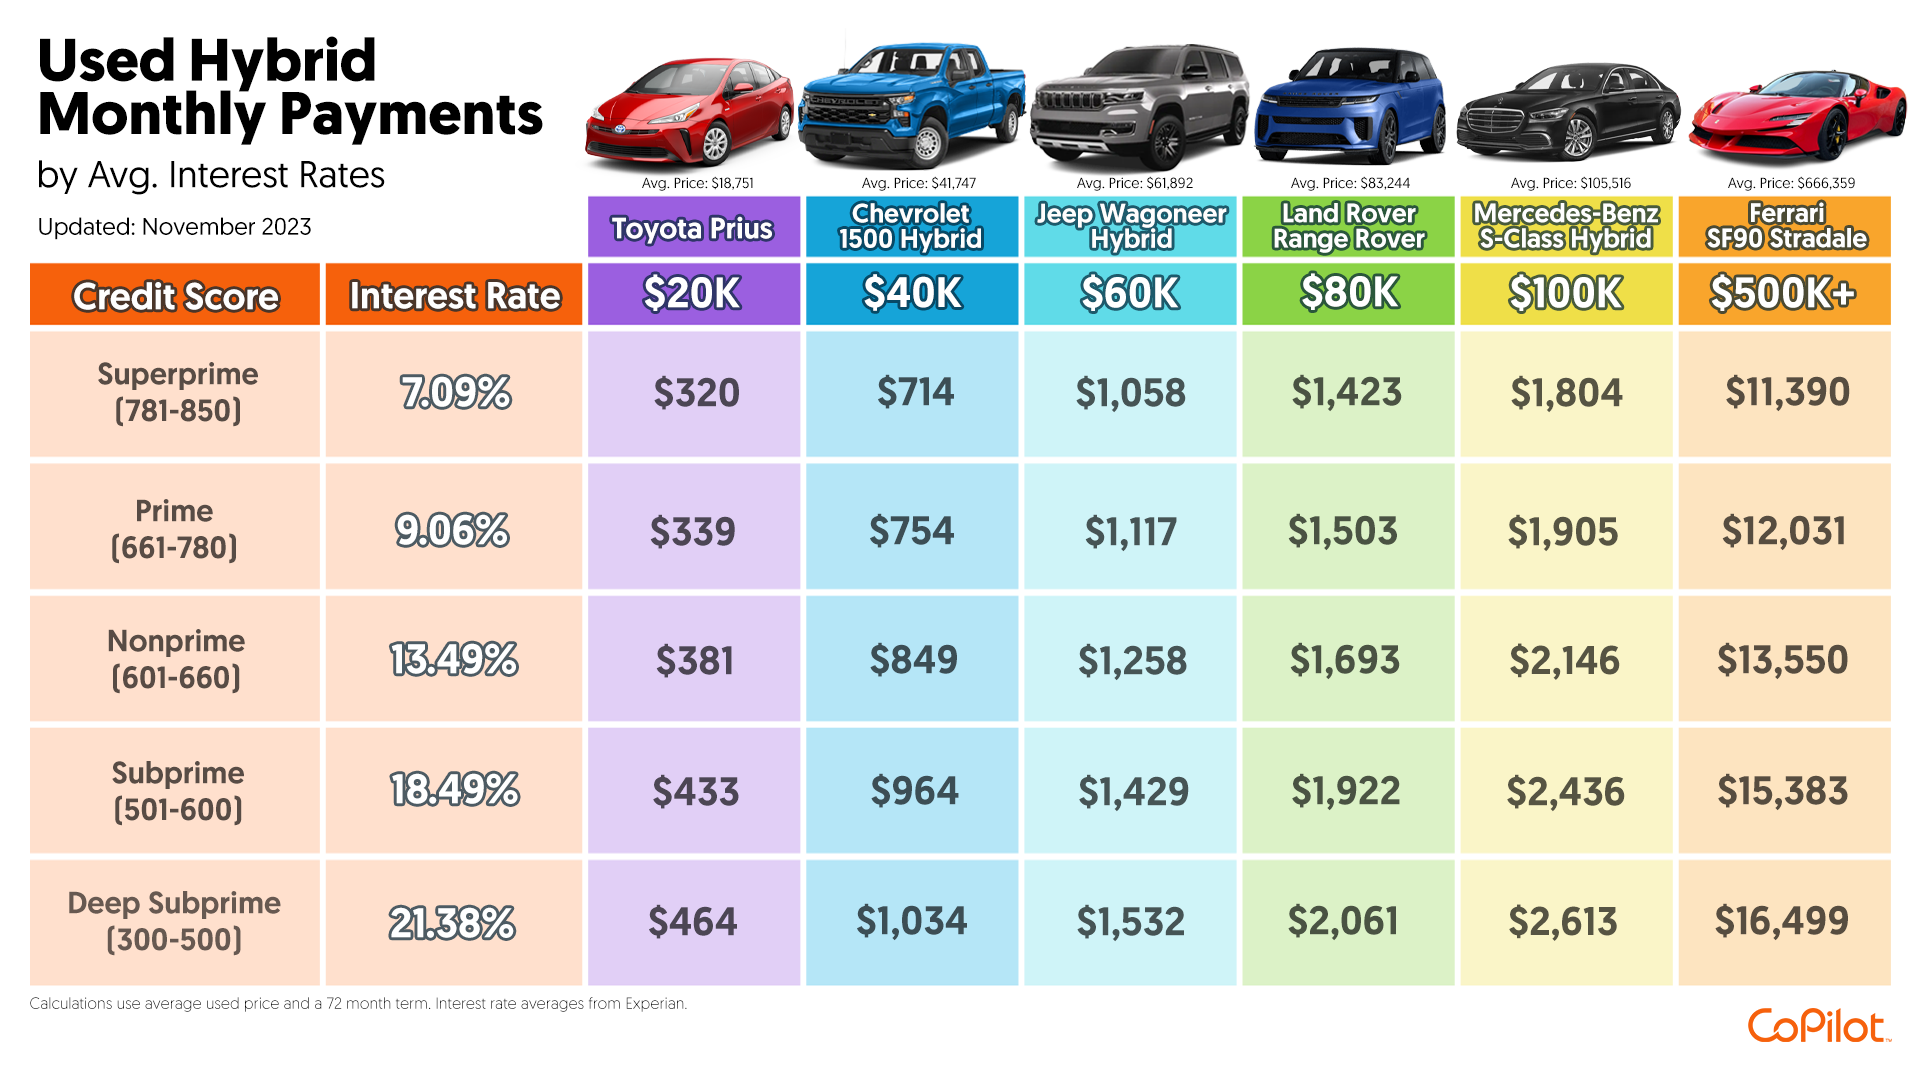 A chart showing a comparison of Used EV Monthly Payments